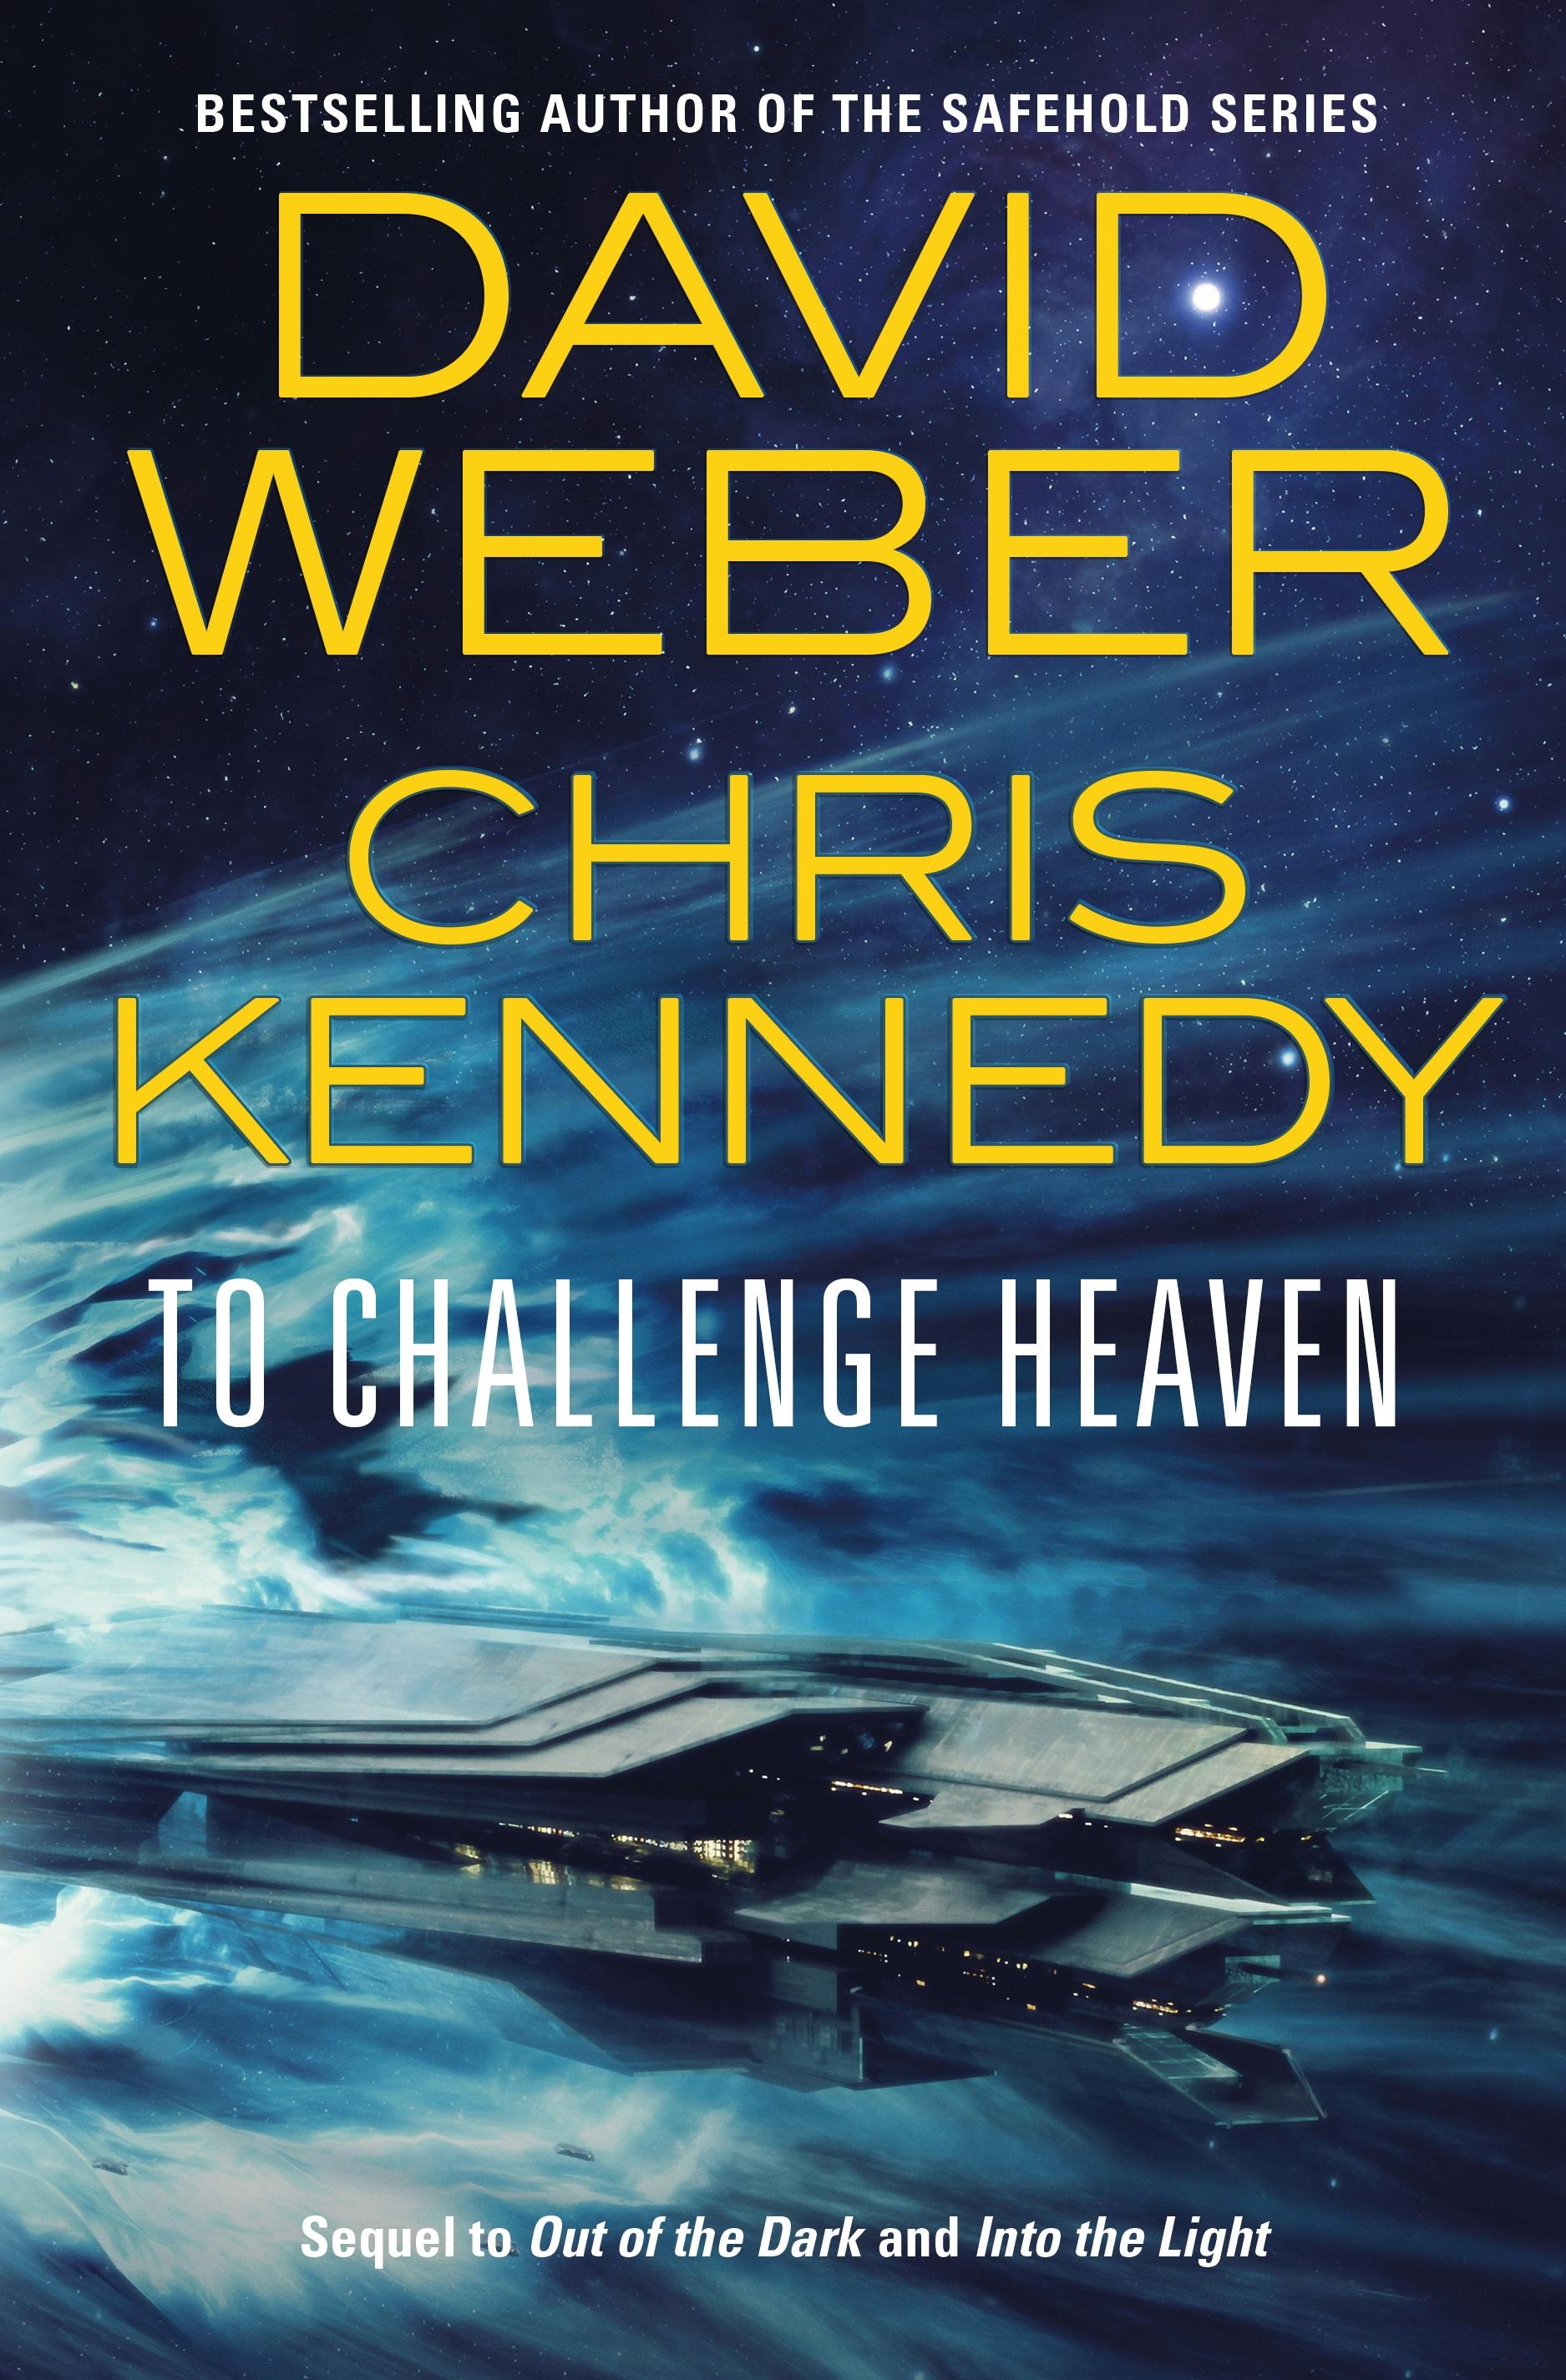 Cover for the book titled as: To Challenge Heaven